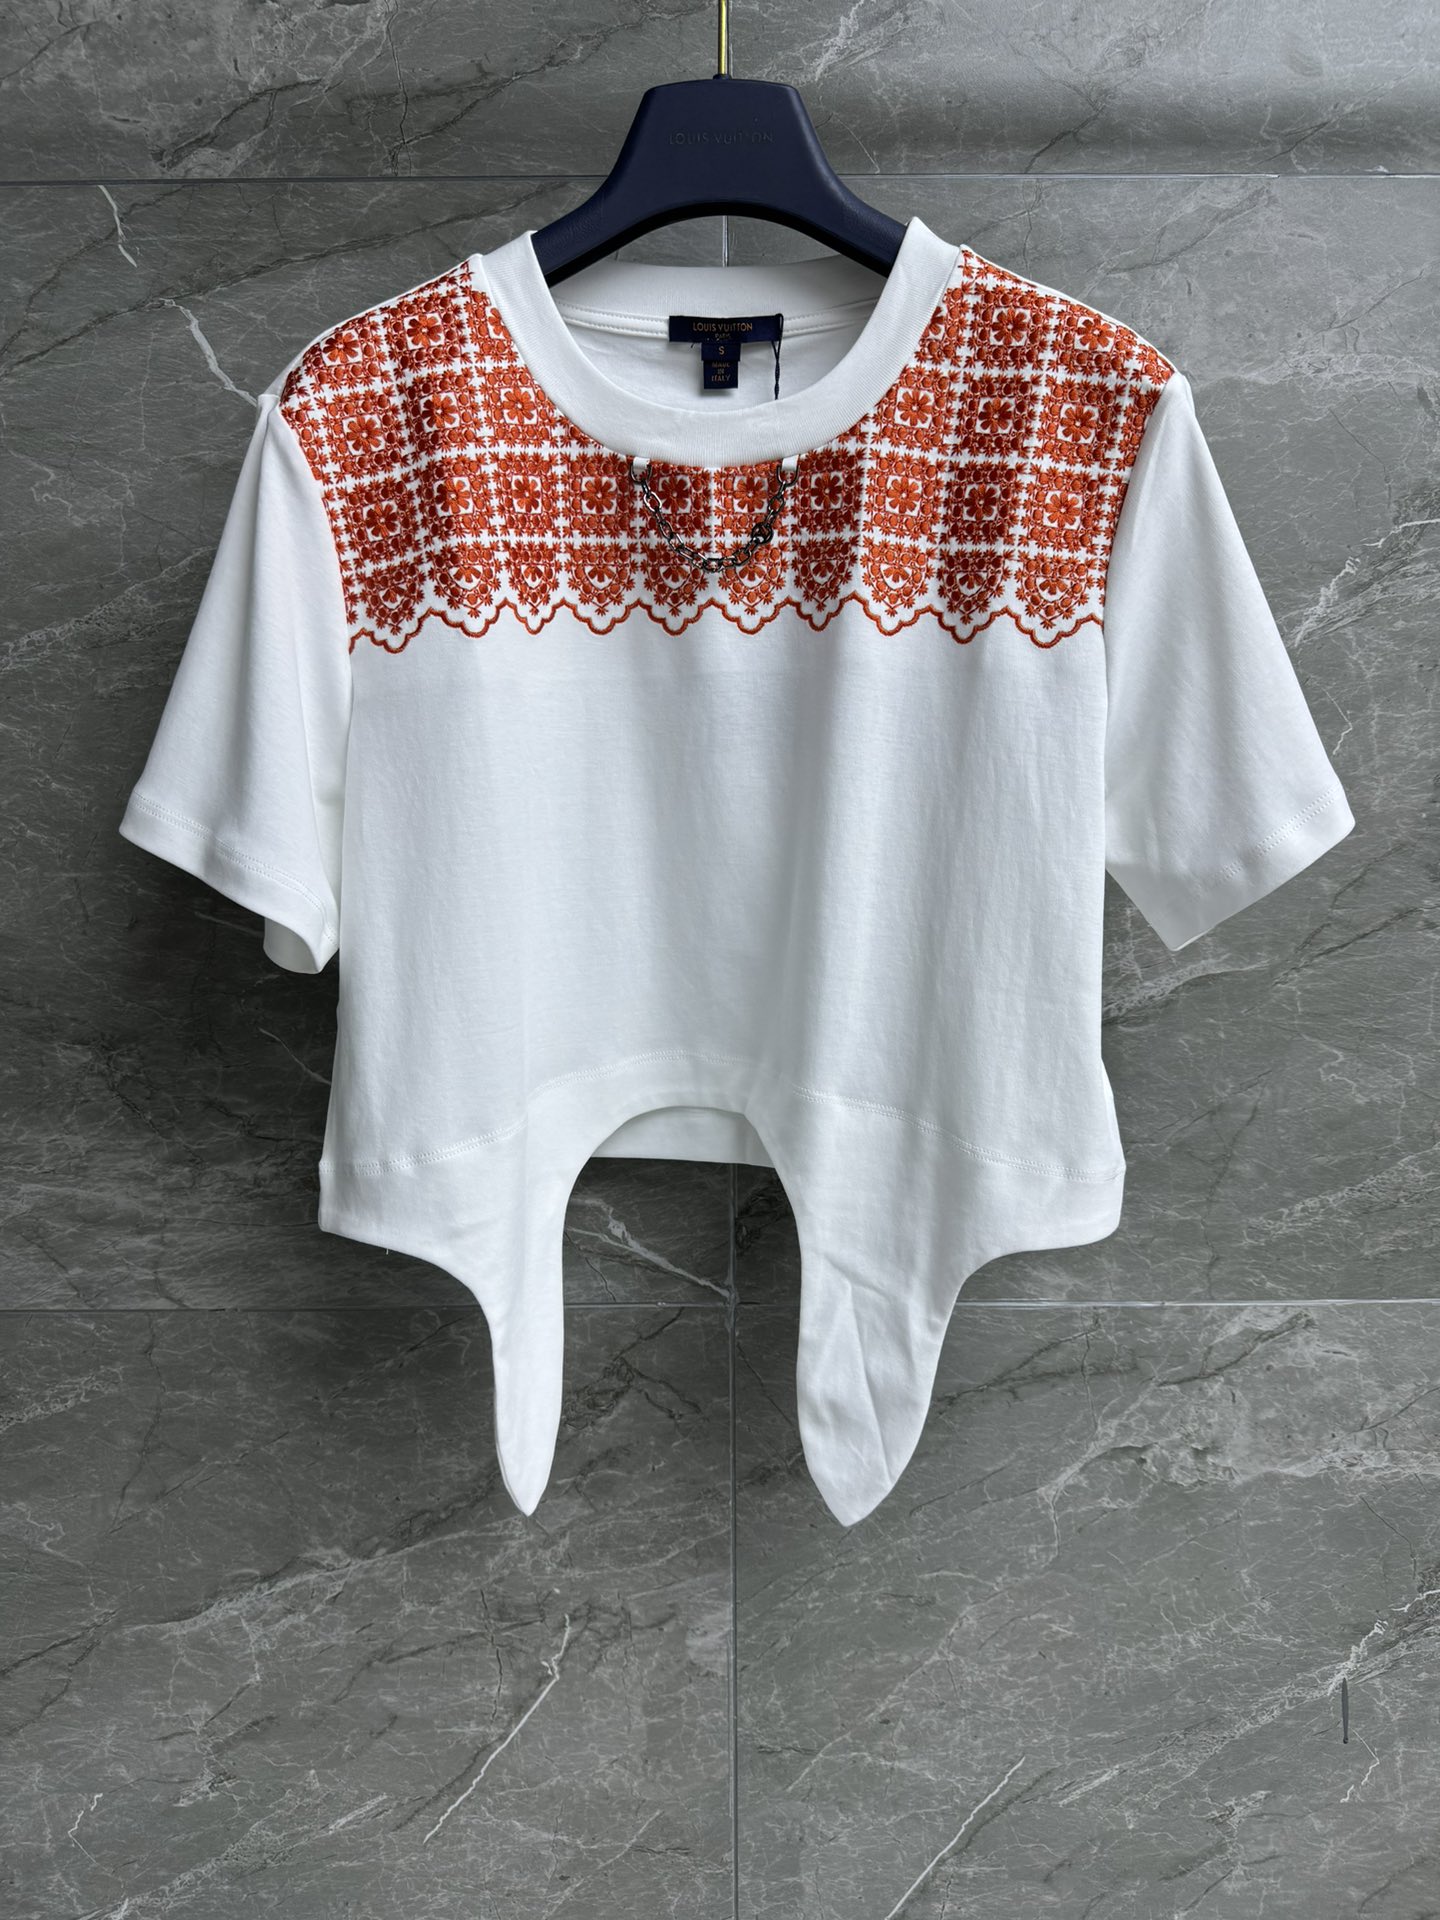 Louis Vuitton Clothing T-Shirt Embroidery Cotton Summer Collection